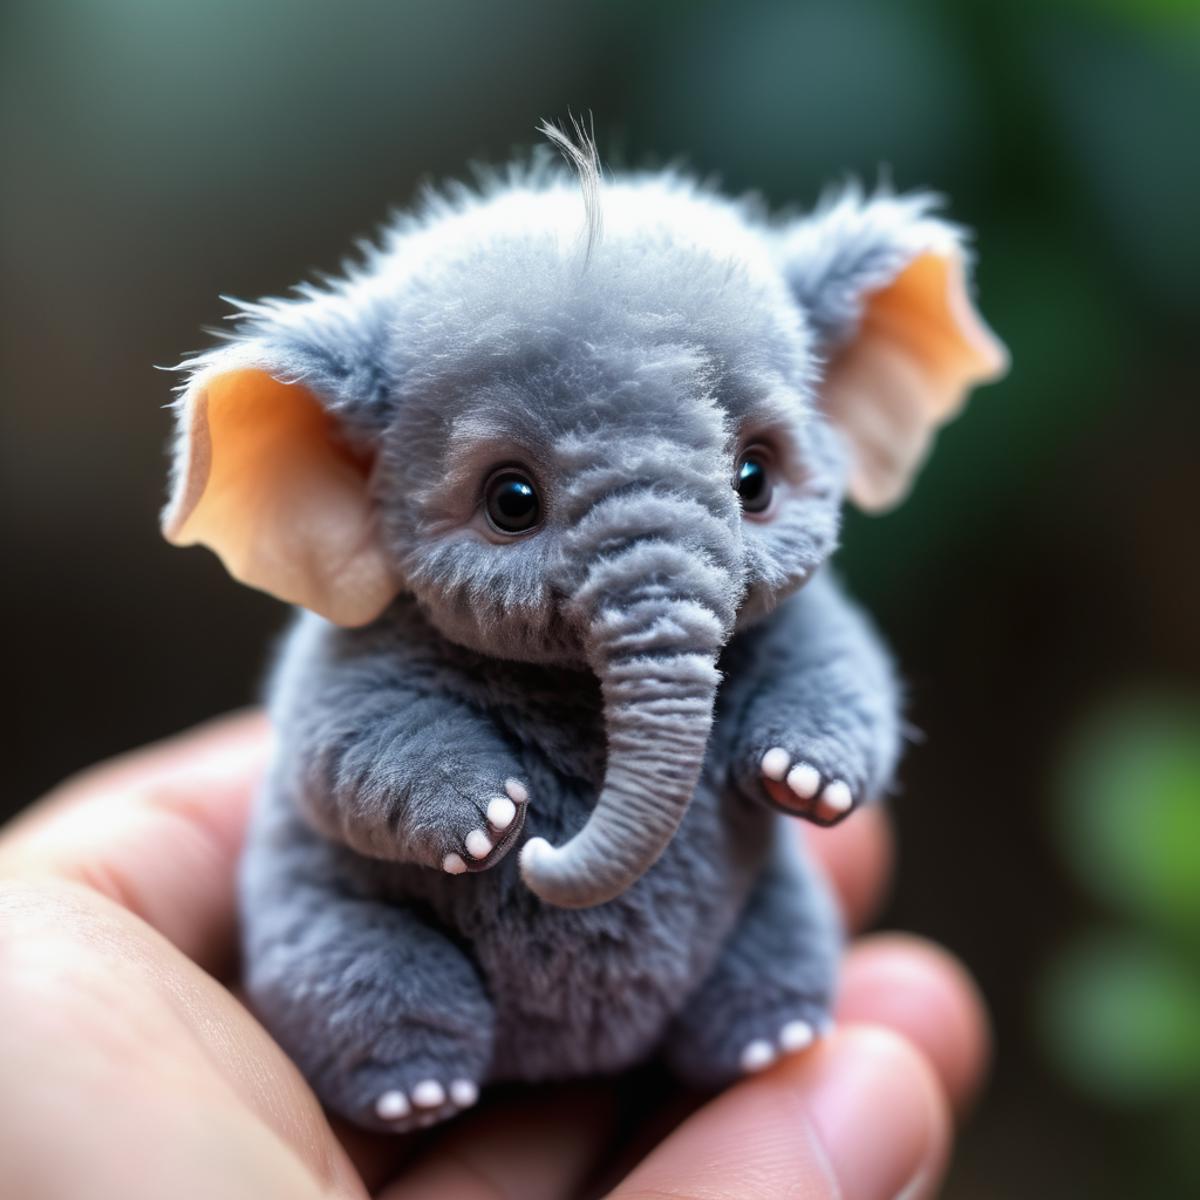 A small gray stuffed elephant being held in a person's hand.